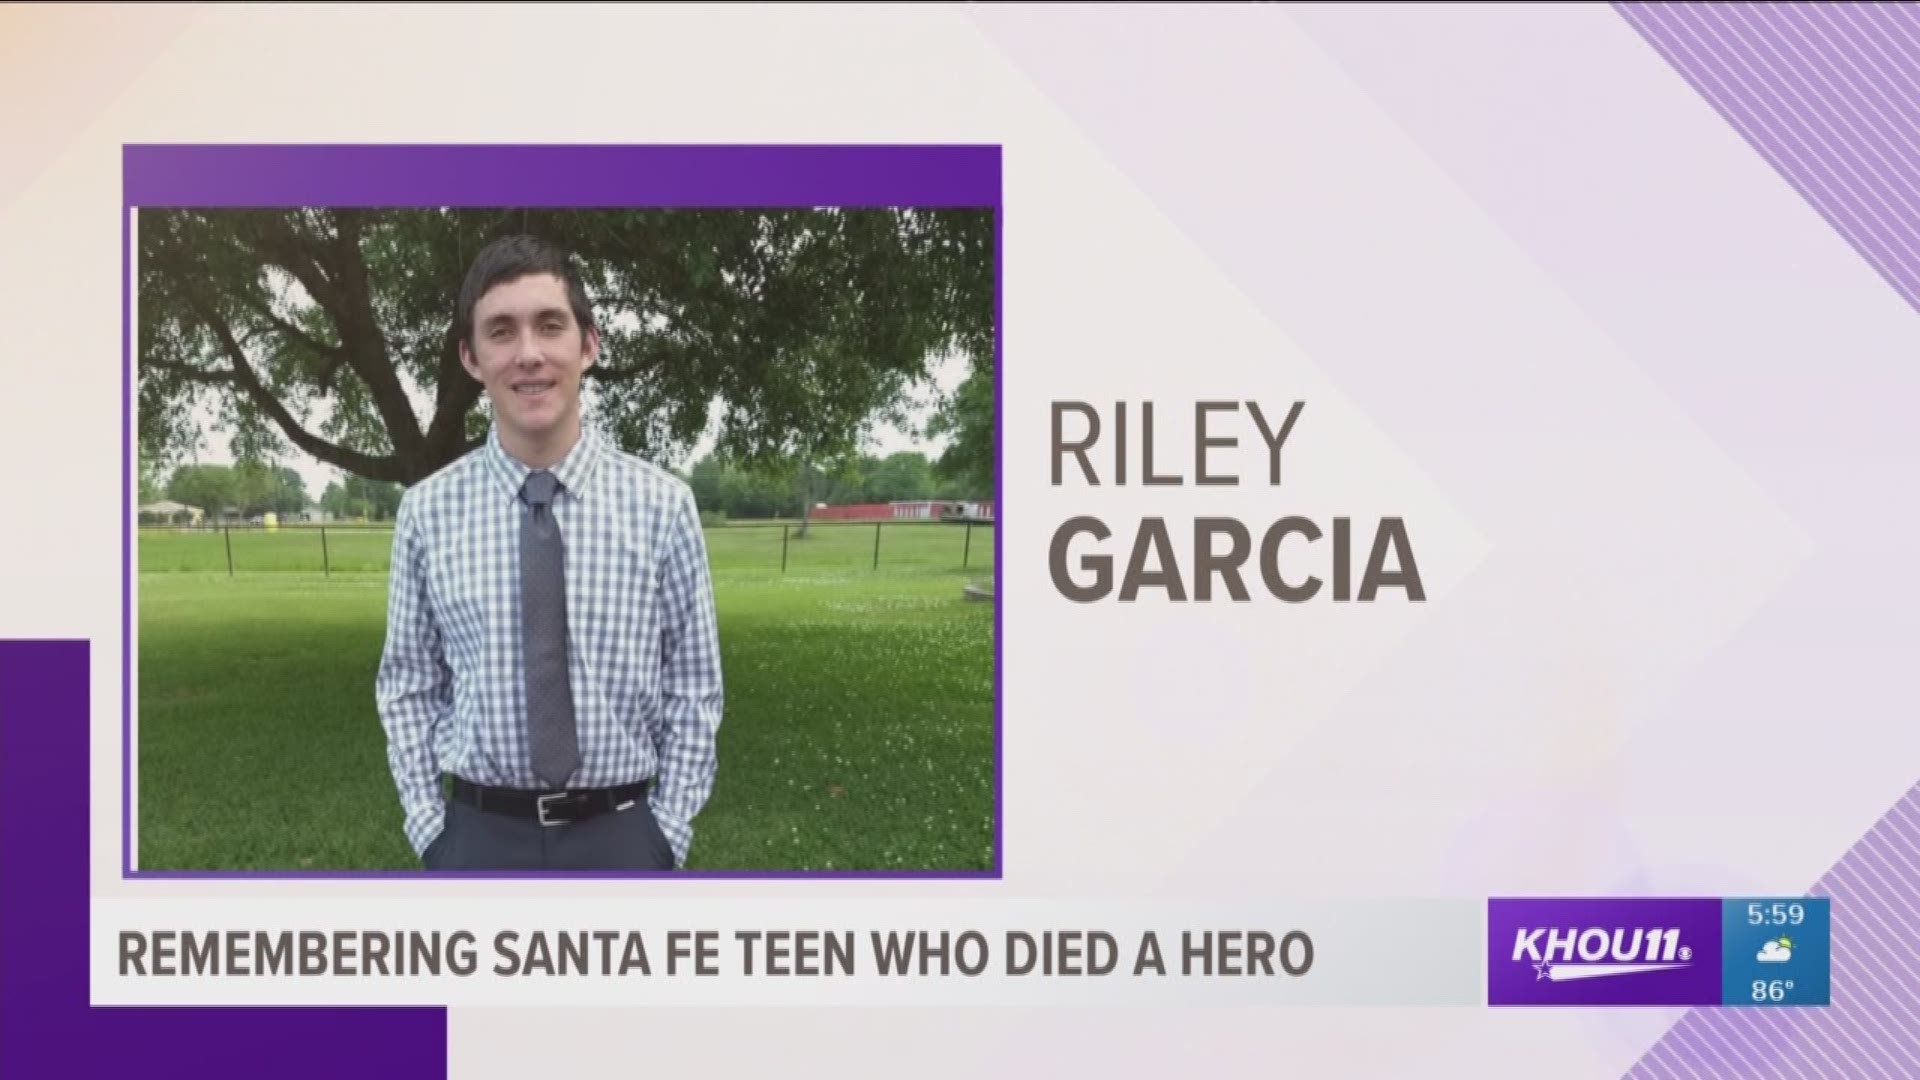 Christian "Riley" Garcia has been called a hero by at least one eyewitness who says the 15-year-old saved multiple students by barricading a door with his body so the shooter could not make entry. He was killed when the shooter fired through the door.